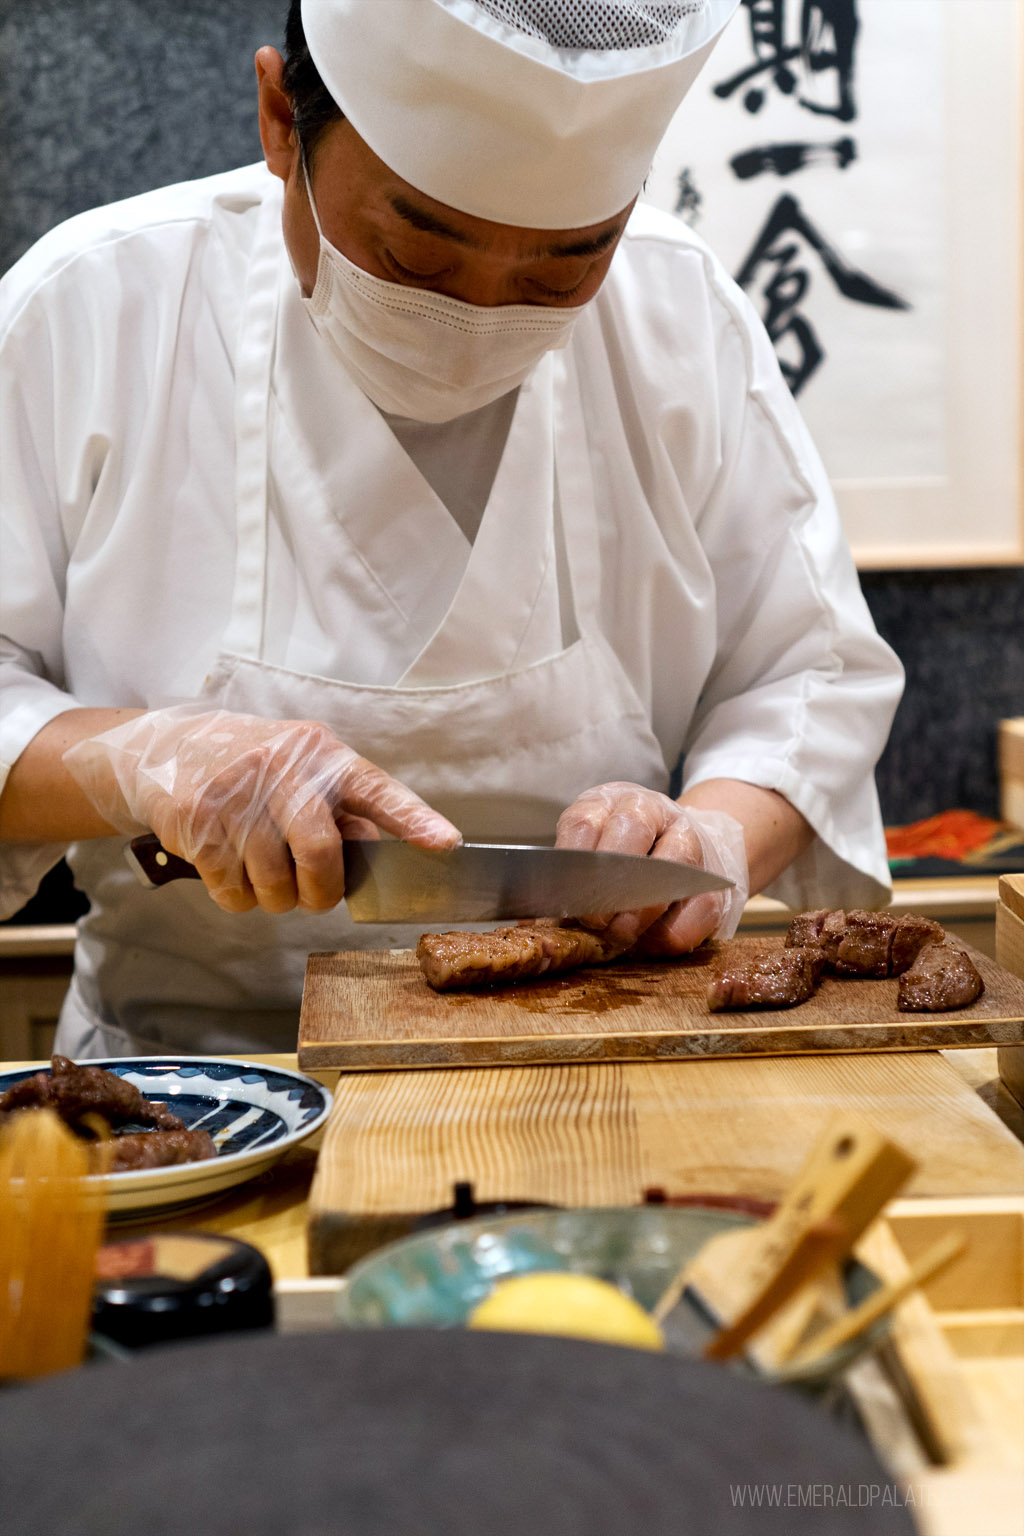 Chef Taneda chopping wagyu beef at an omakase chefs counter